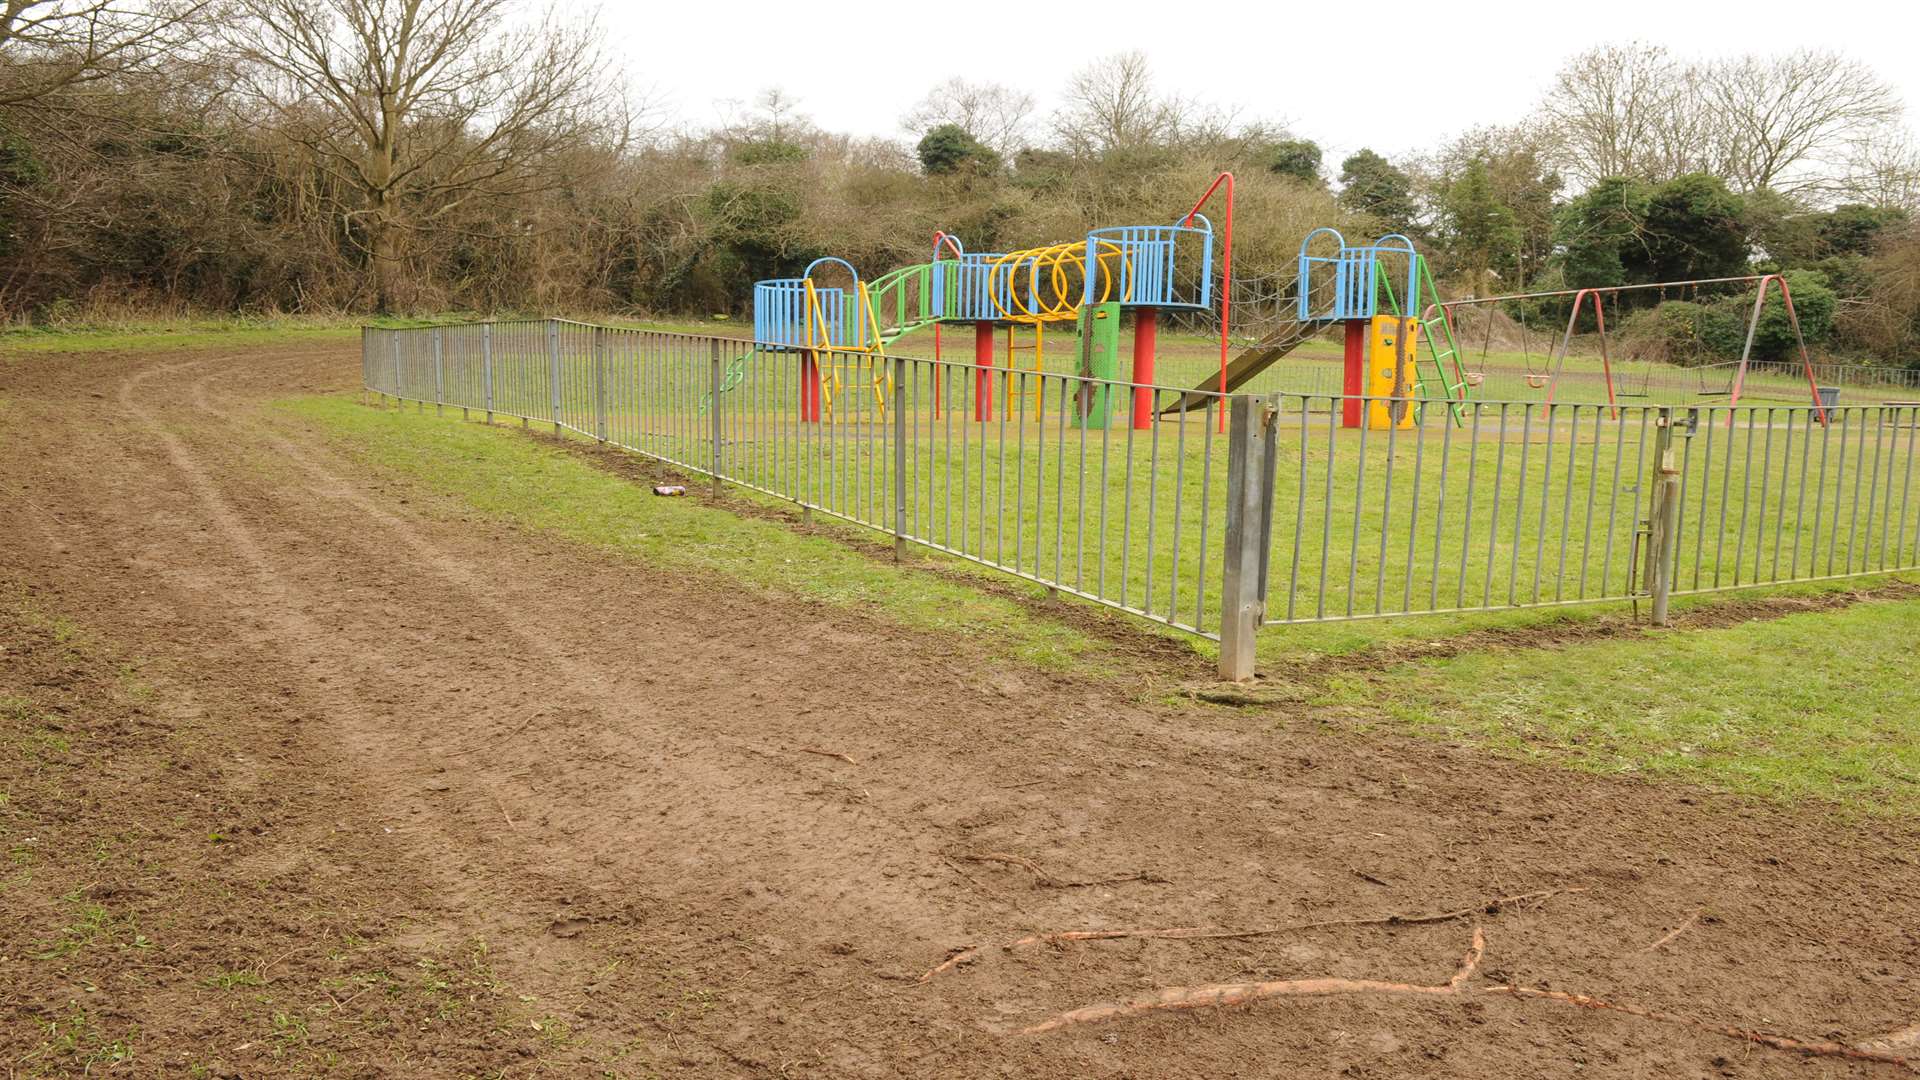 Quad bikes have torn up the grass at the Princes Avenue play area